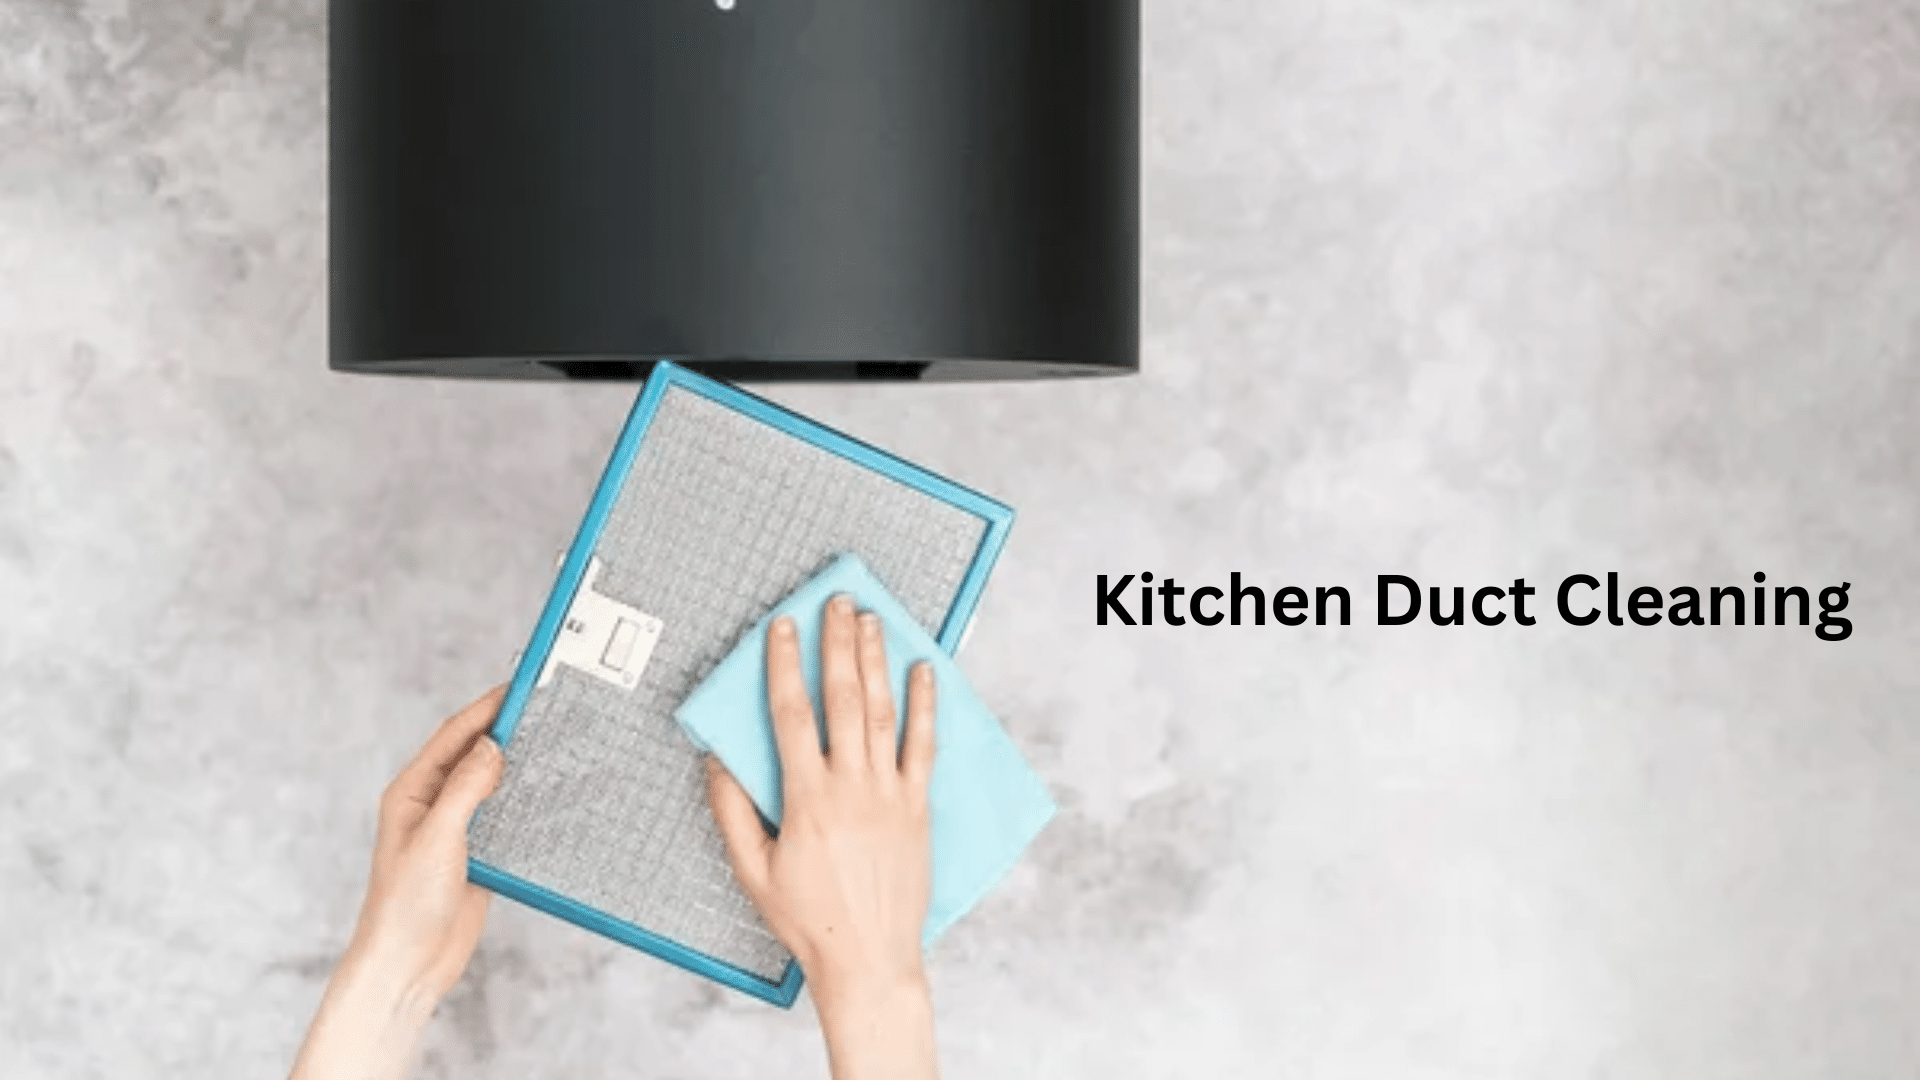 Kitchen Duct Cleaning